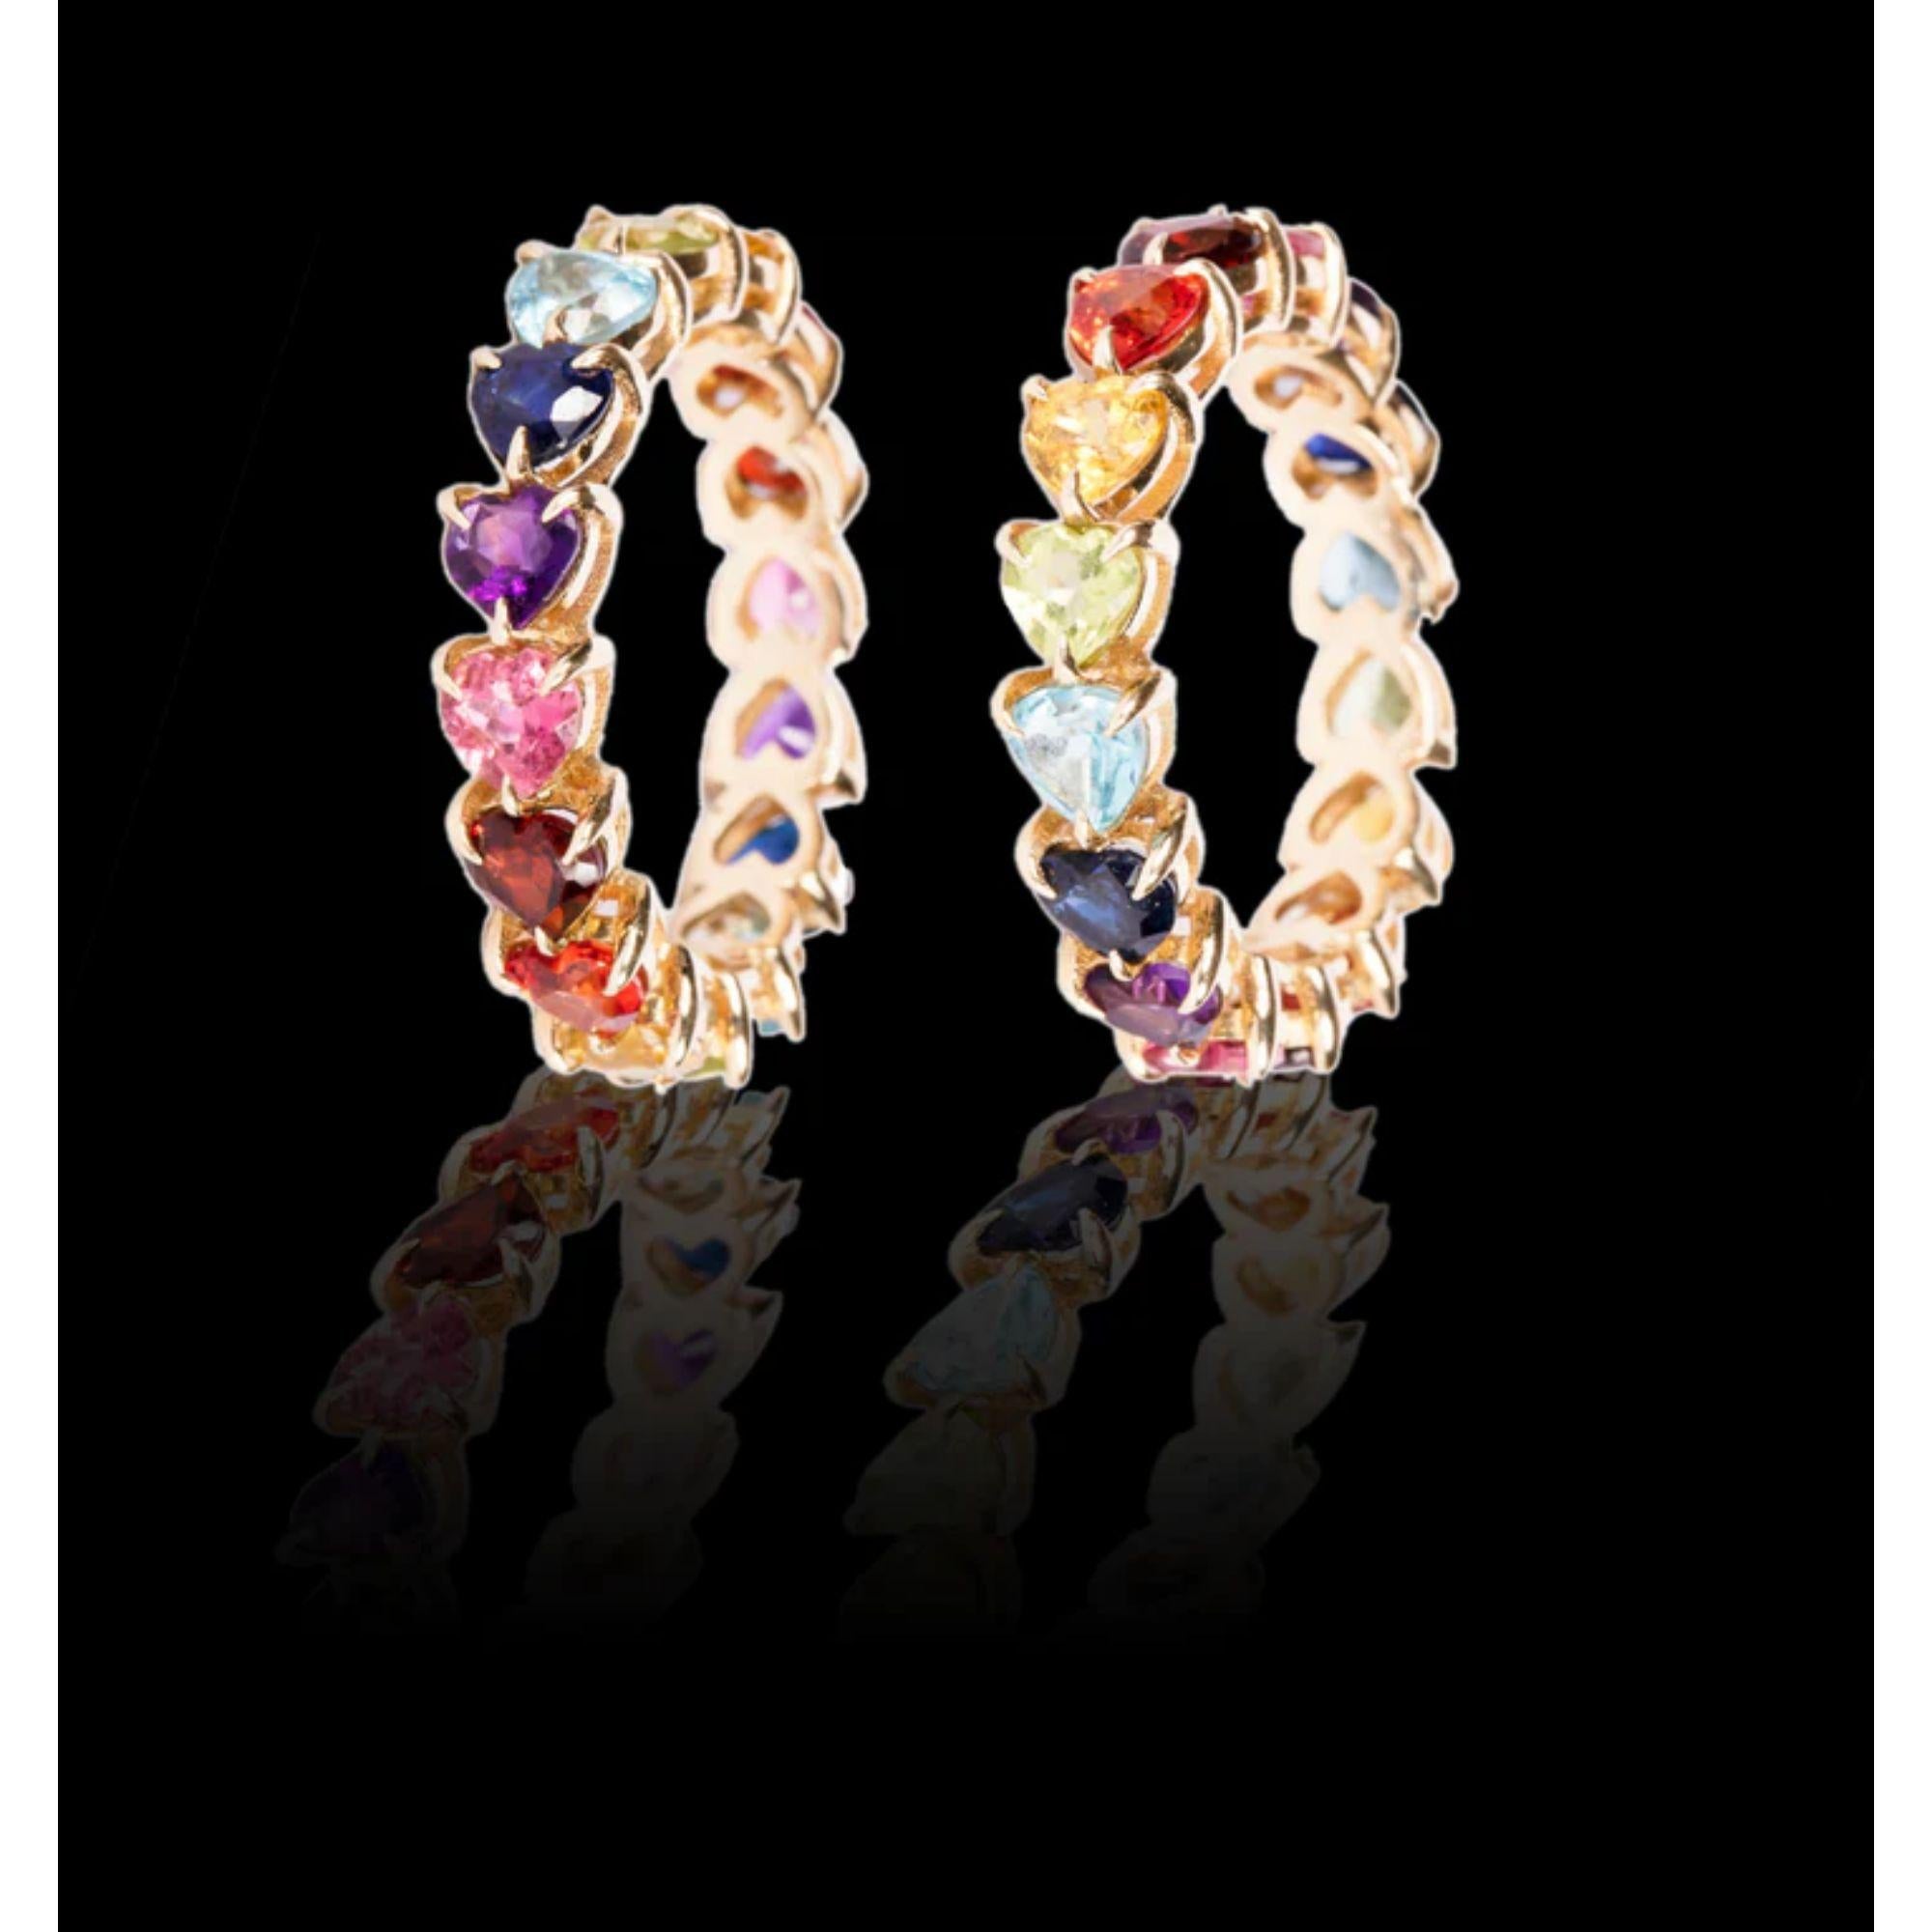 As the first fine jewelry piece from the house of Mordekai, we are celebrating one of our iconic themes, the Rainbow! This unique ring is made of 14k gold, and hand-set with the finest hand-selected, colored stones and gems sourced from all over the